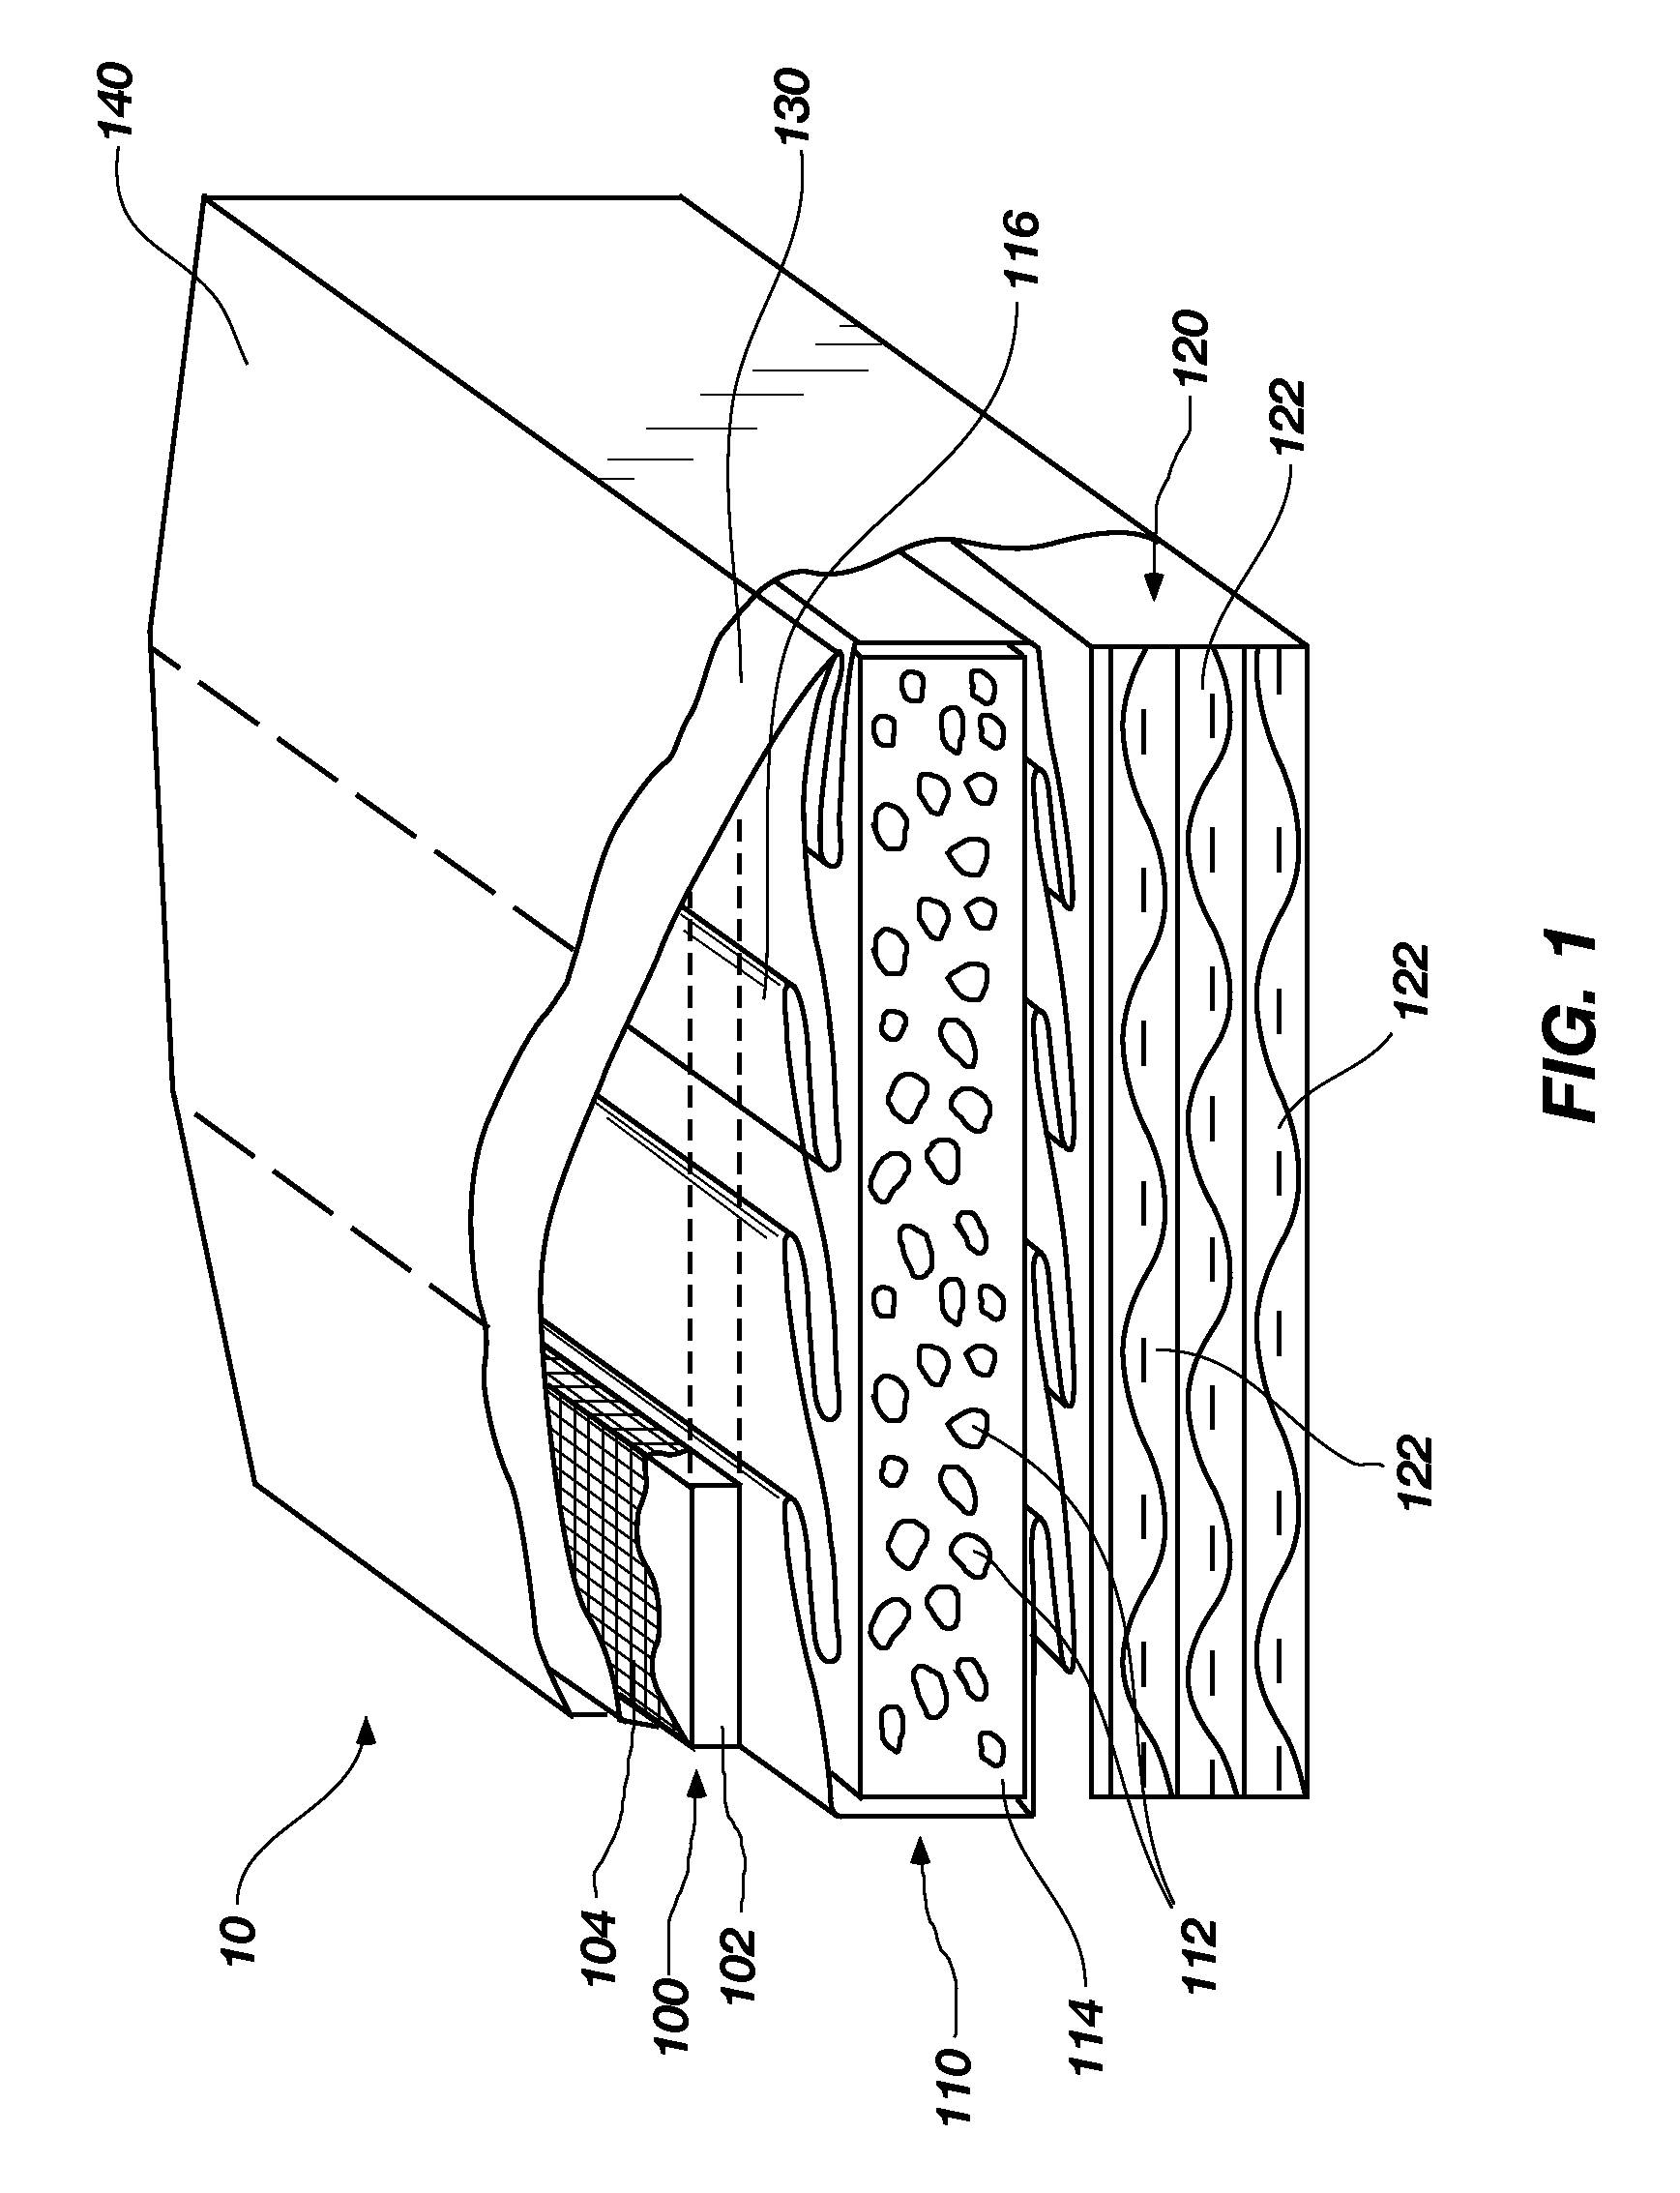 Composite armor, armor system and vehicle including armor system